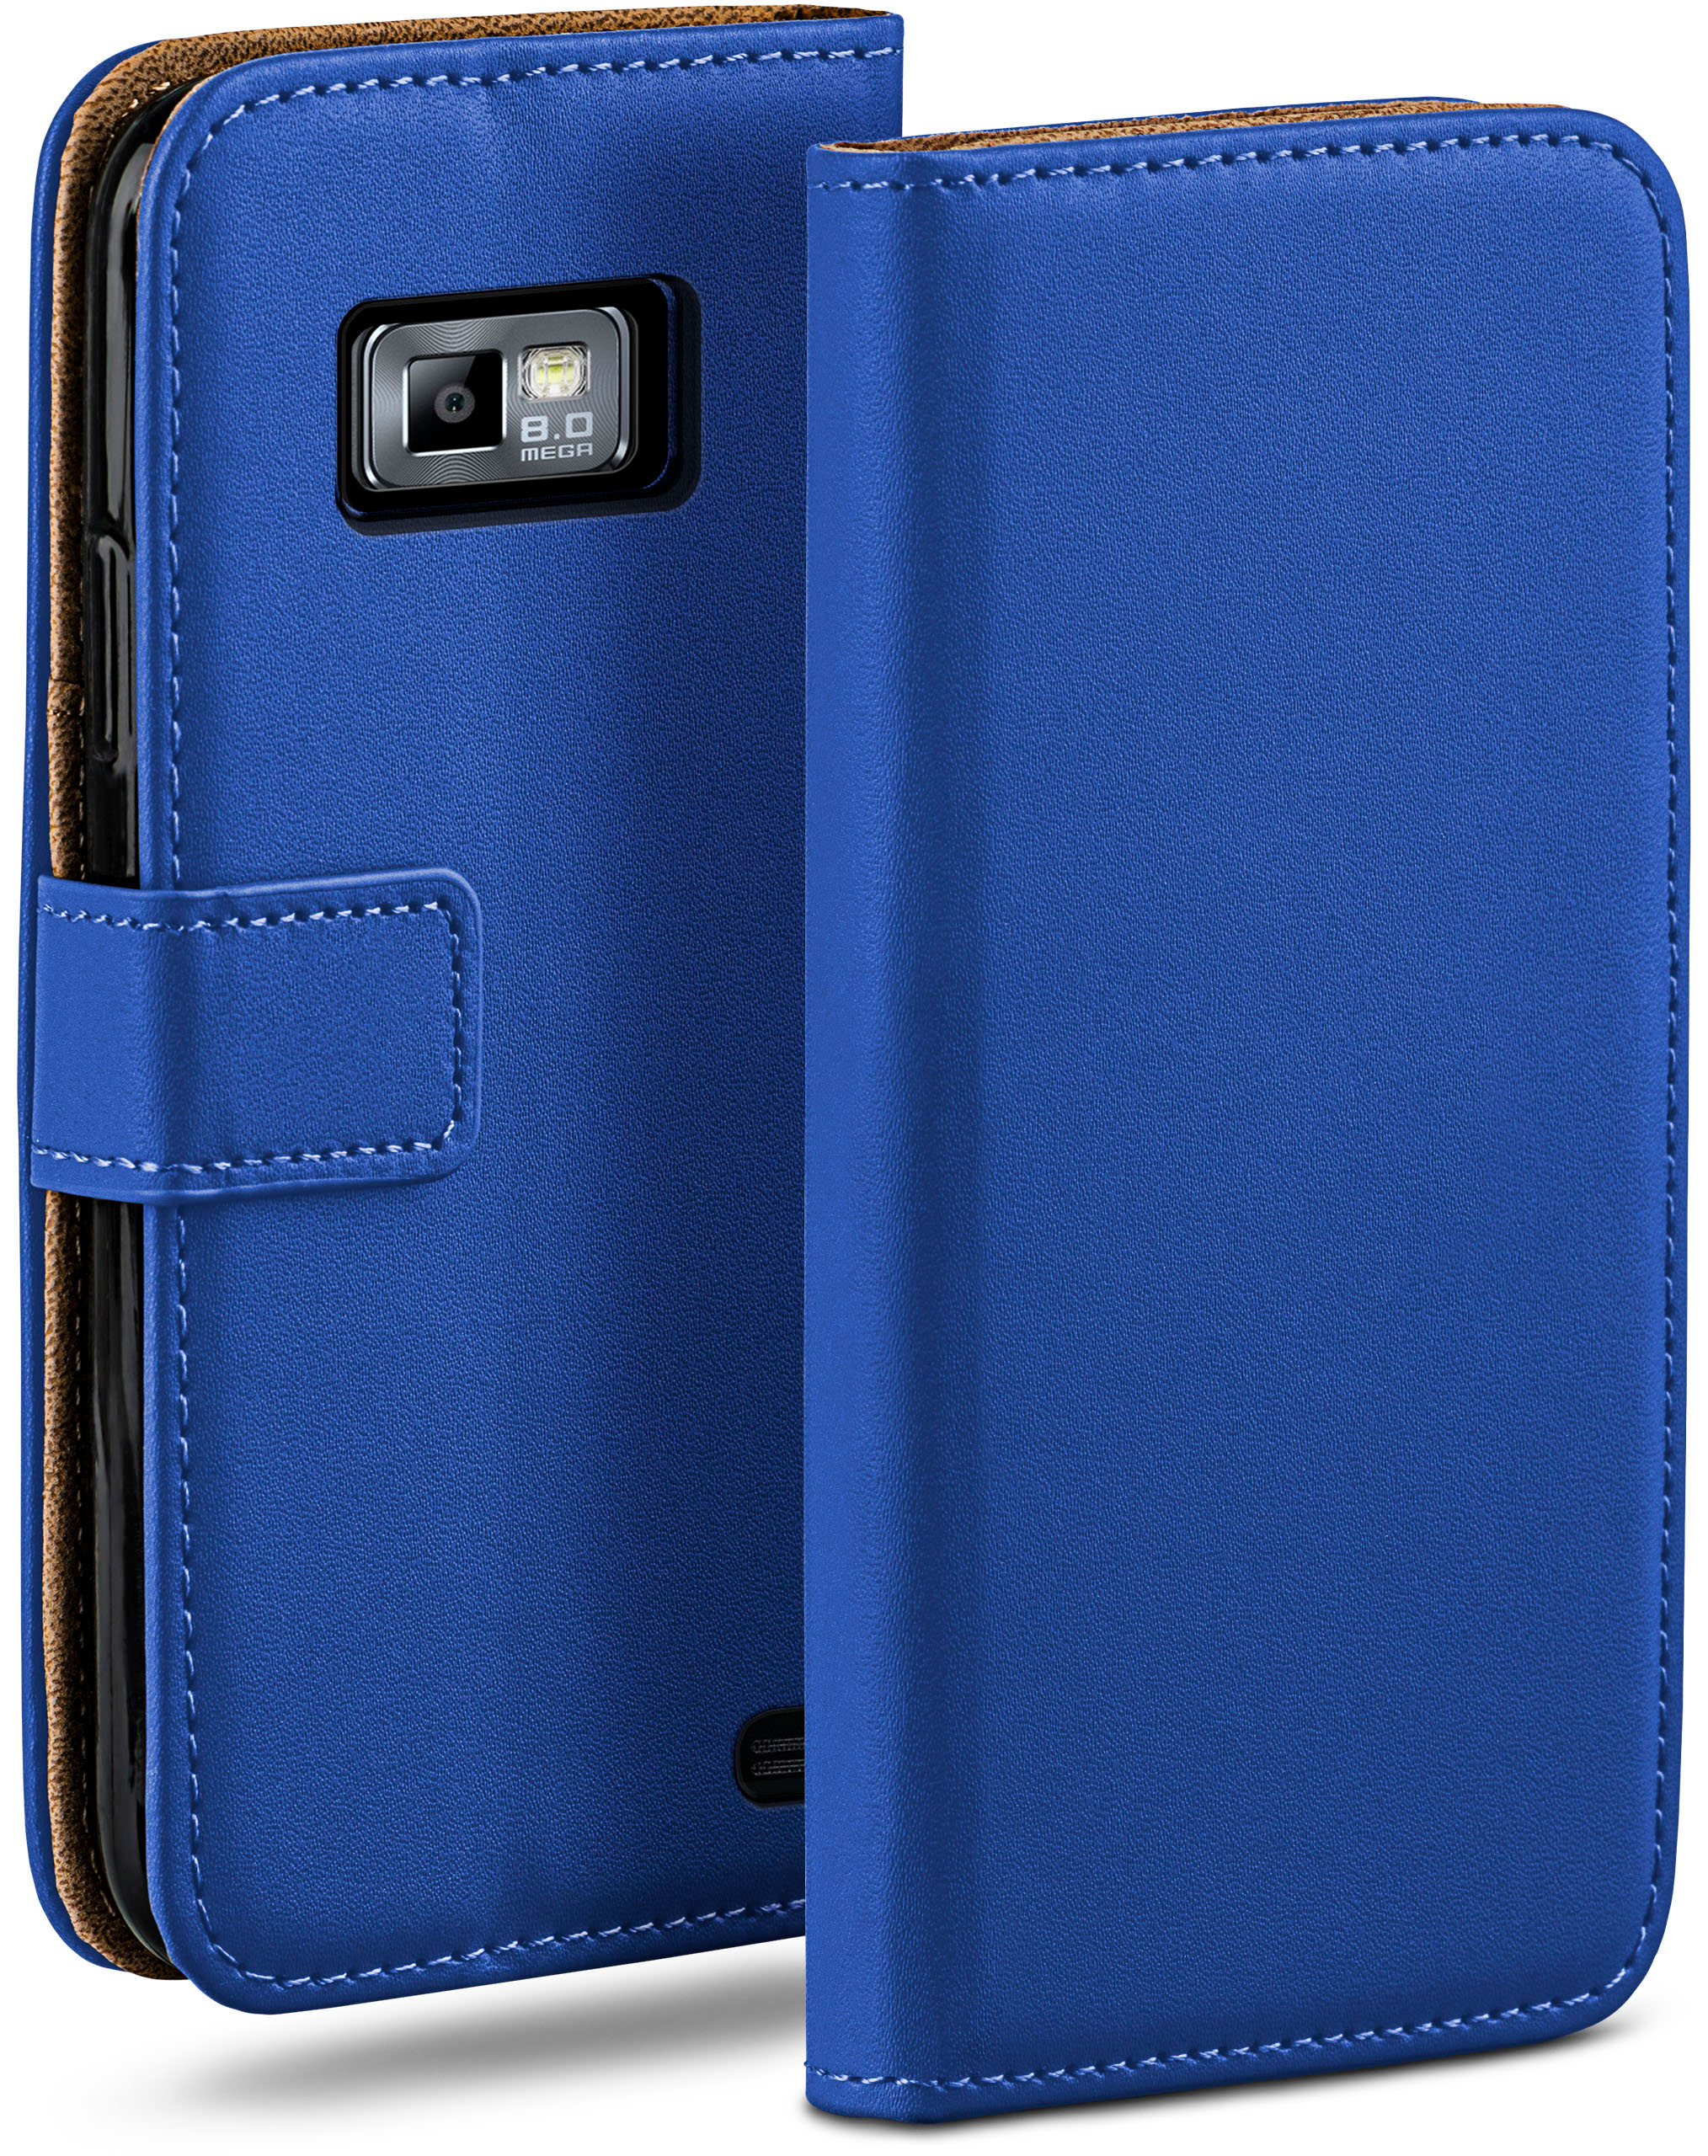 MOEX Book Case, Bookcover, Samsung, S2 Galaxy S2 Royal-Blue Plus, 